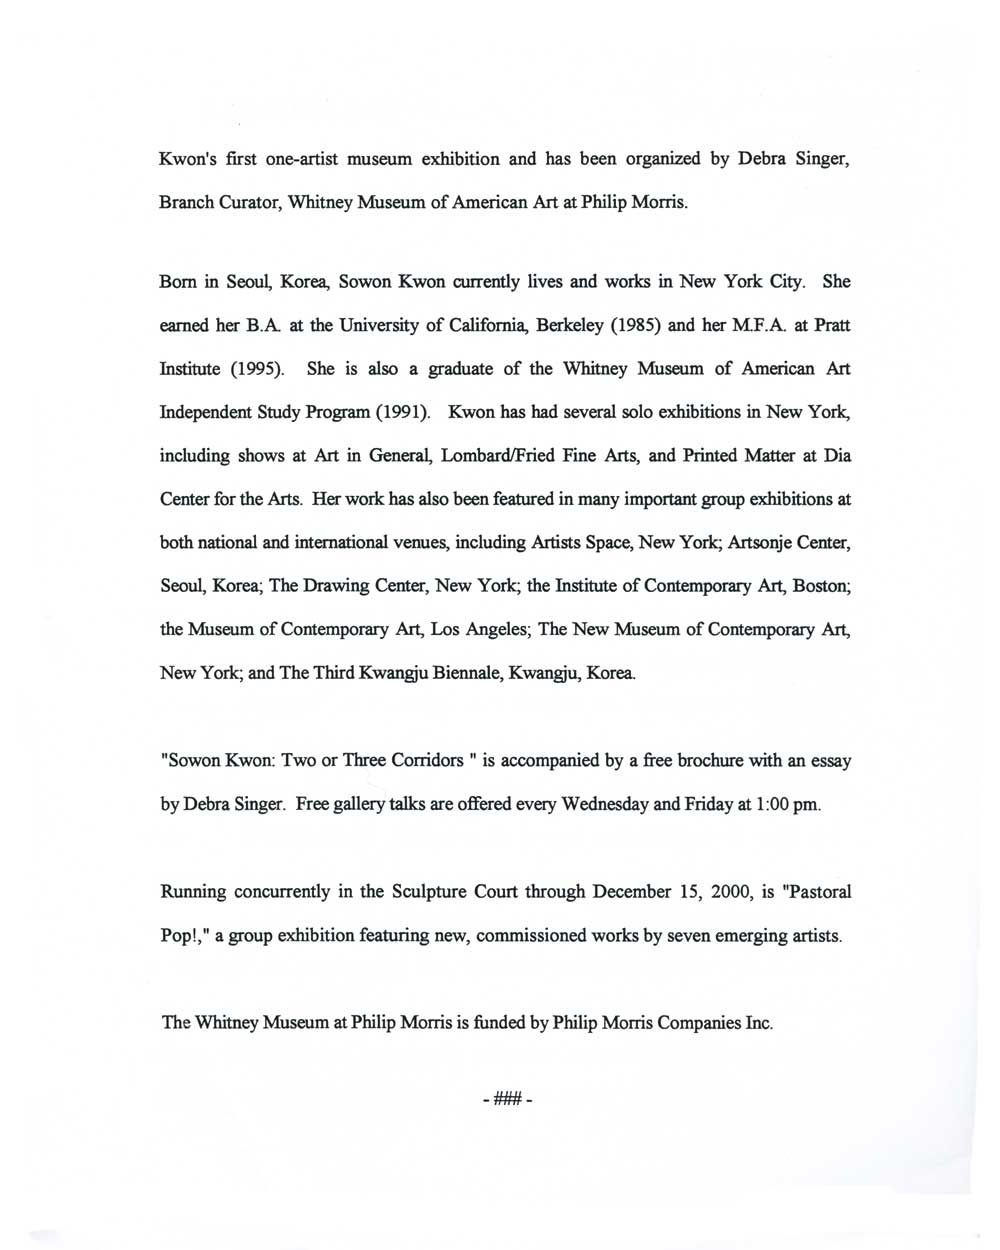 Sowon Kwon: Two or Three Corridors, press release, pg 2